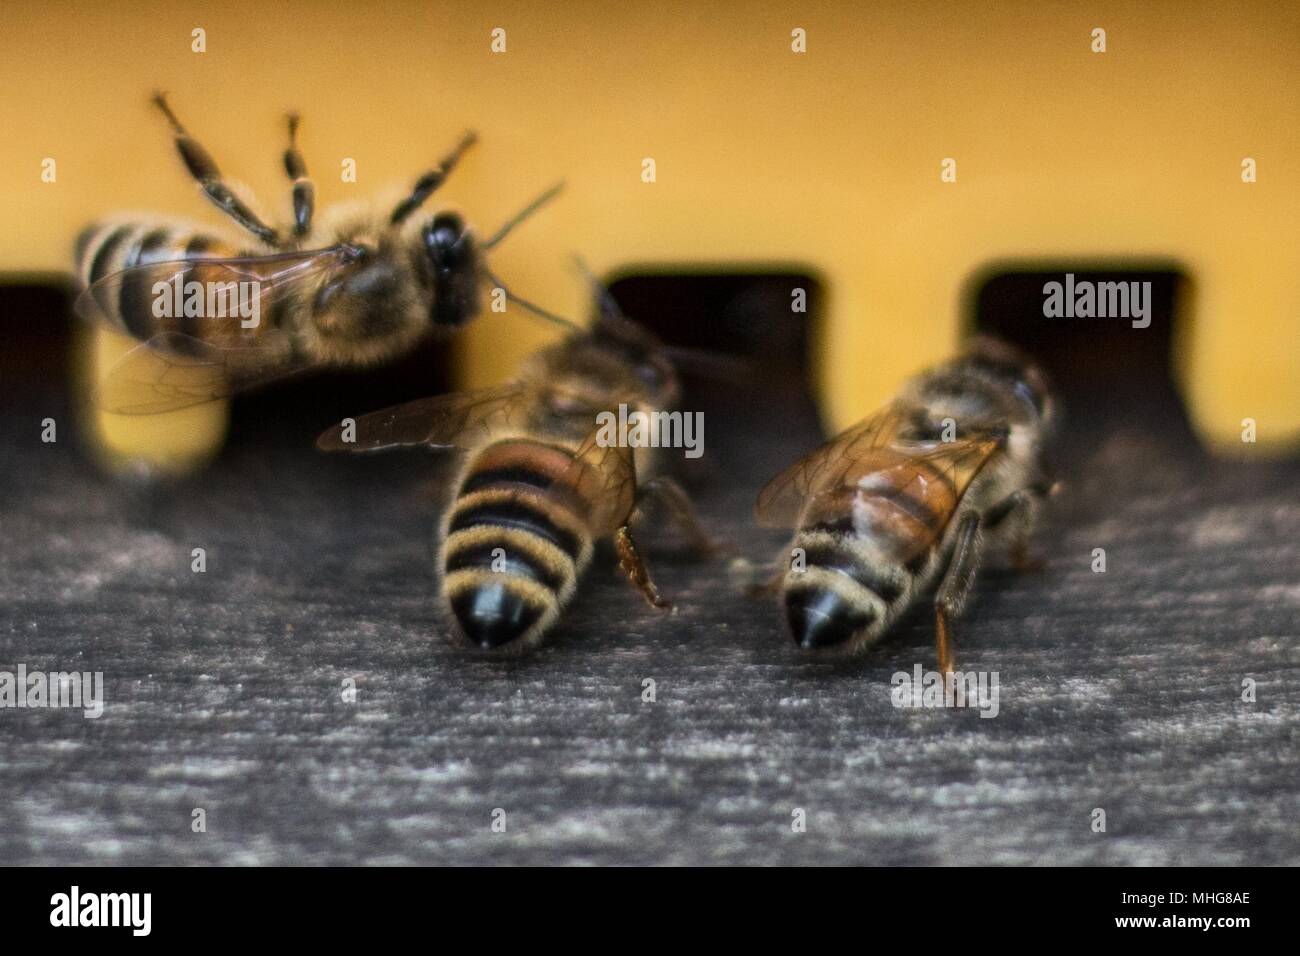 Bees crawl out of a beehive. Stock Photo